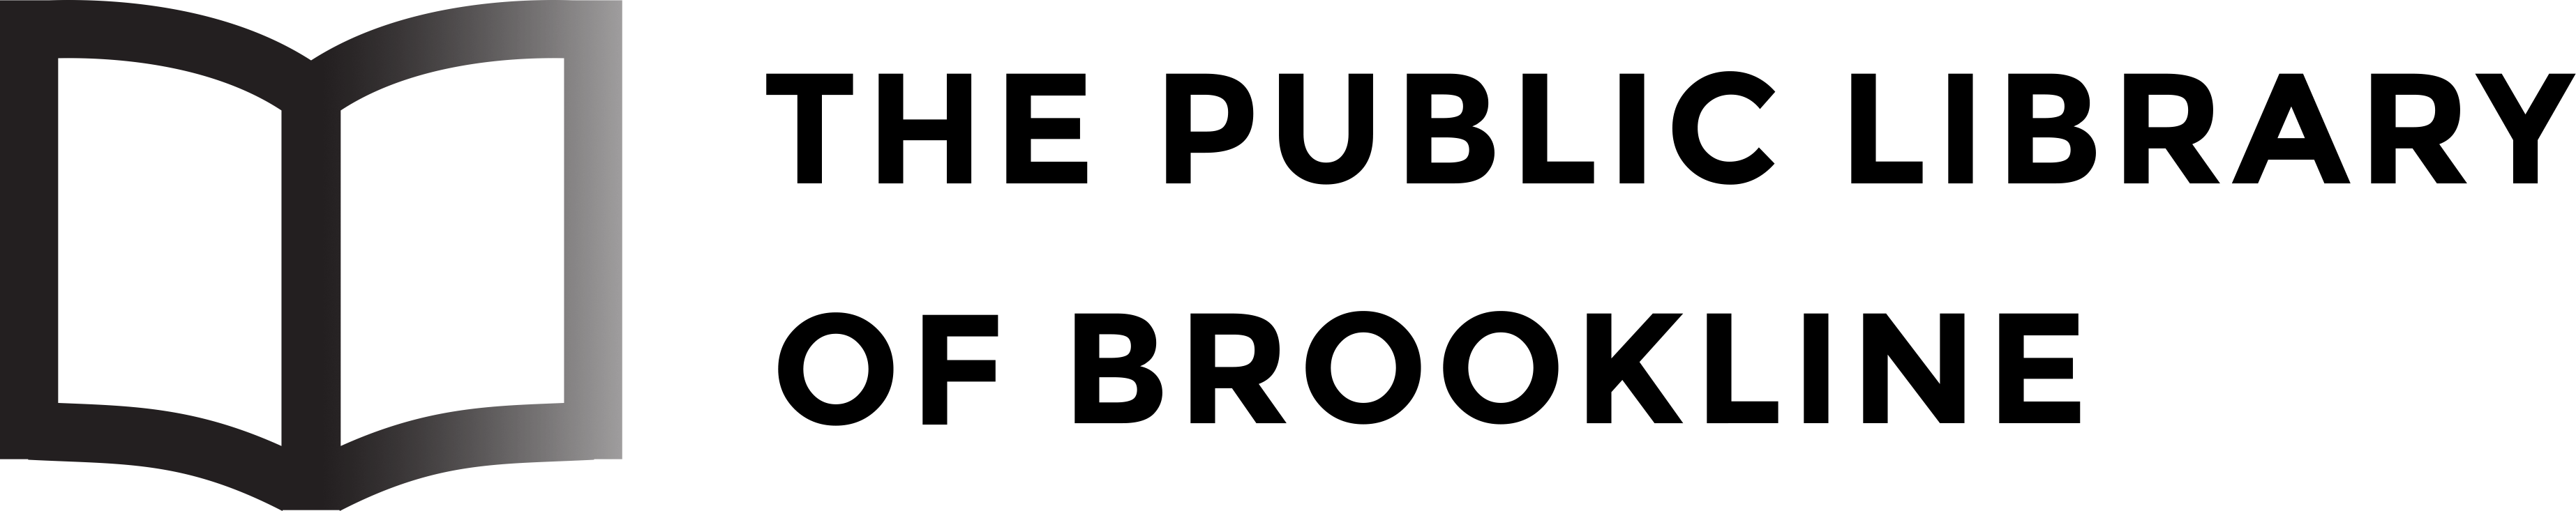 Brookline Logo - Public Library of Brookline | Official Website of the Public Library ...